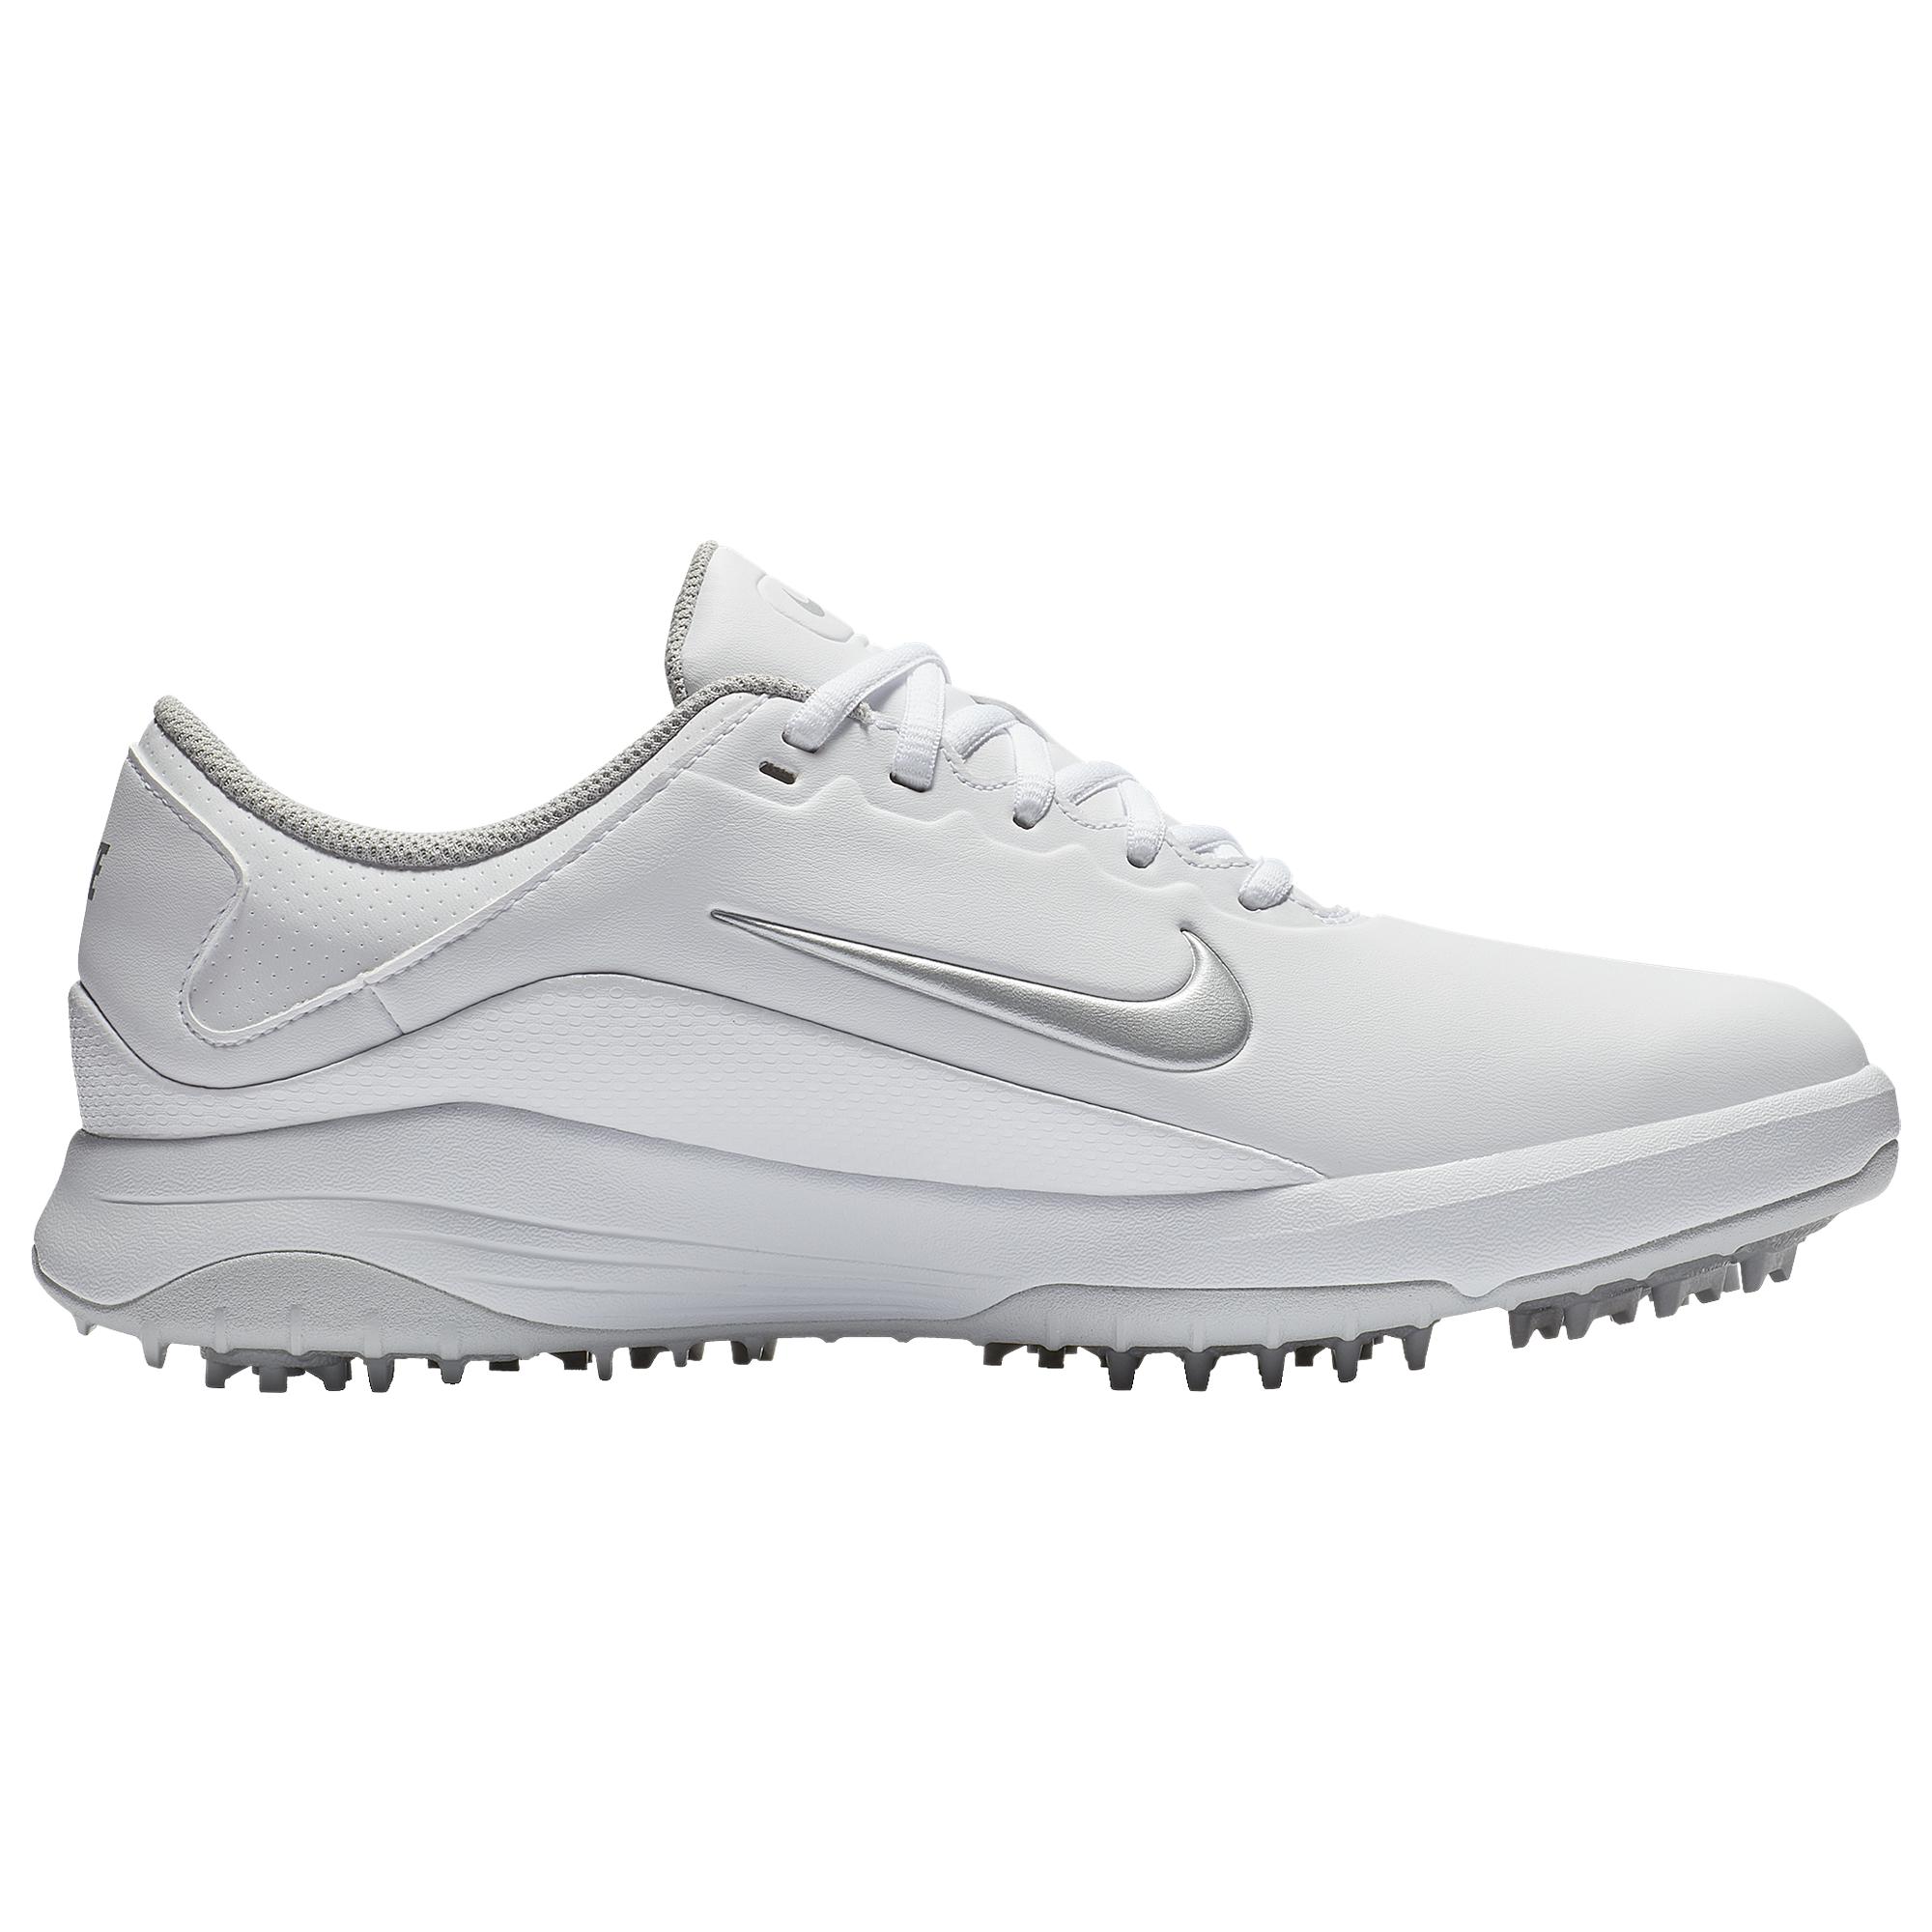 Nike Synthetic Vapor Golf Shoes in 